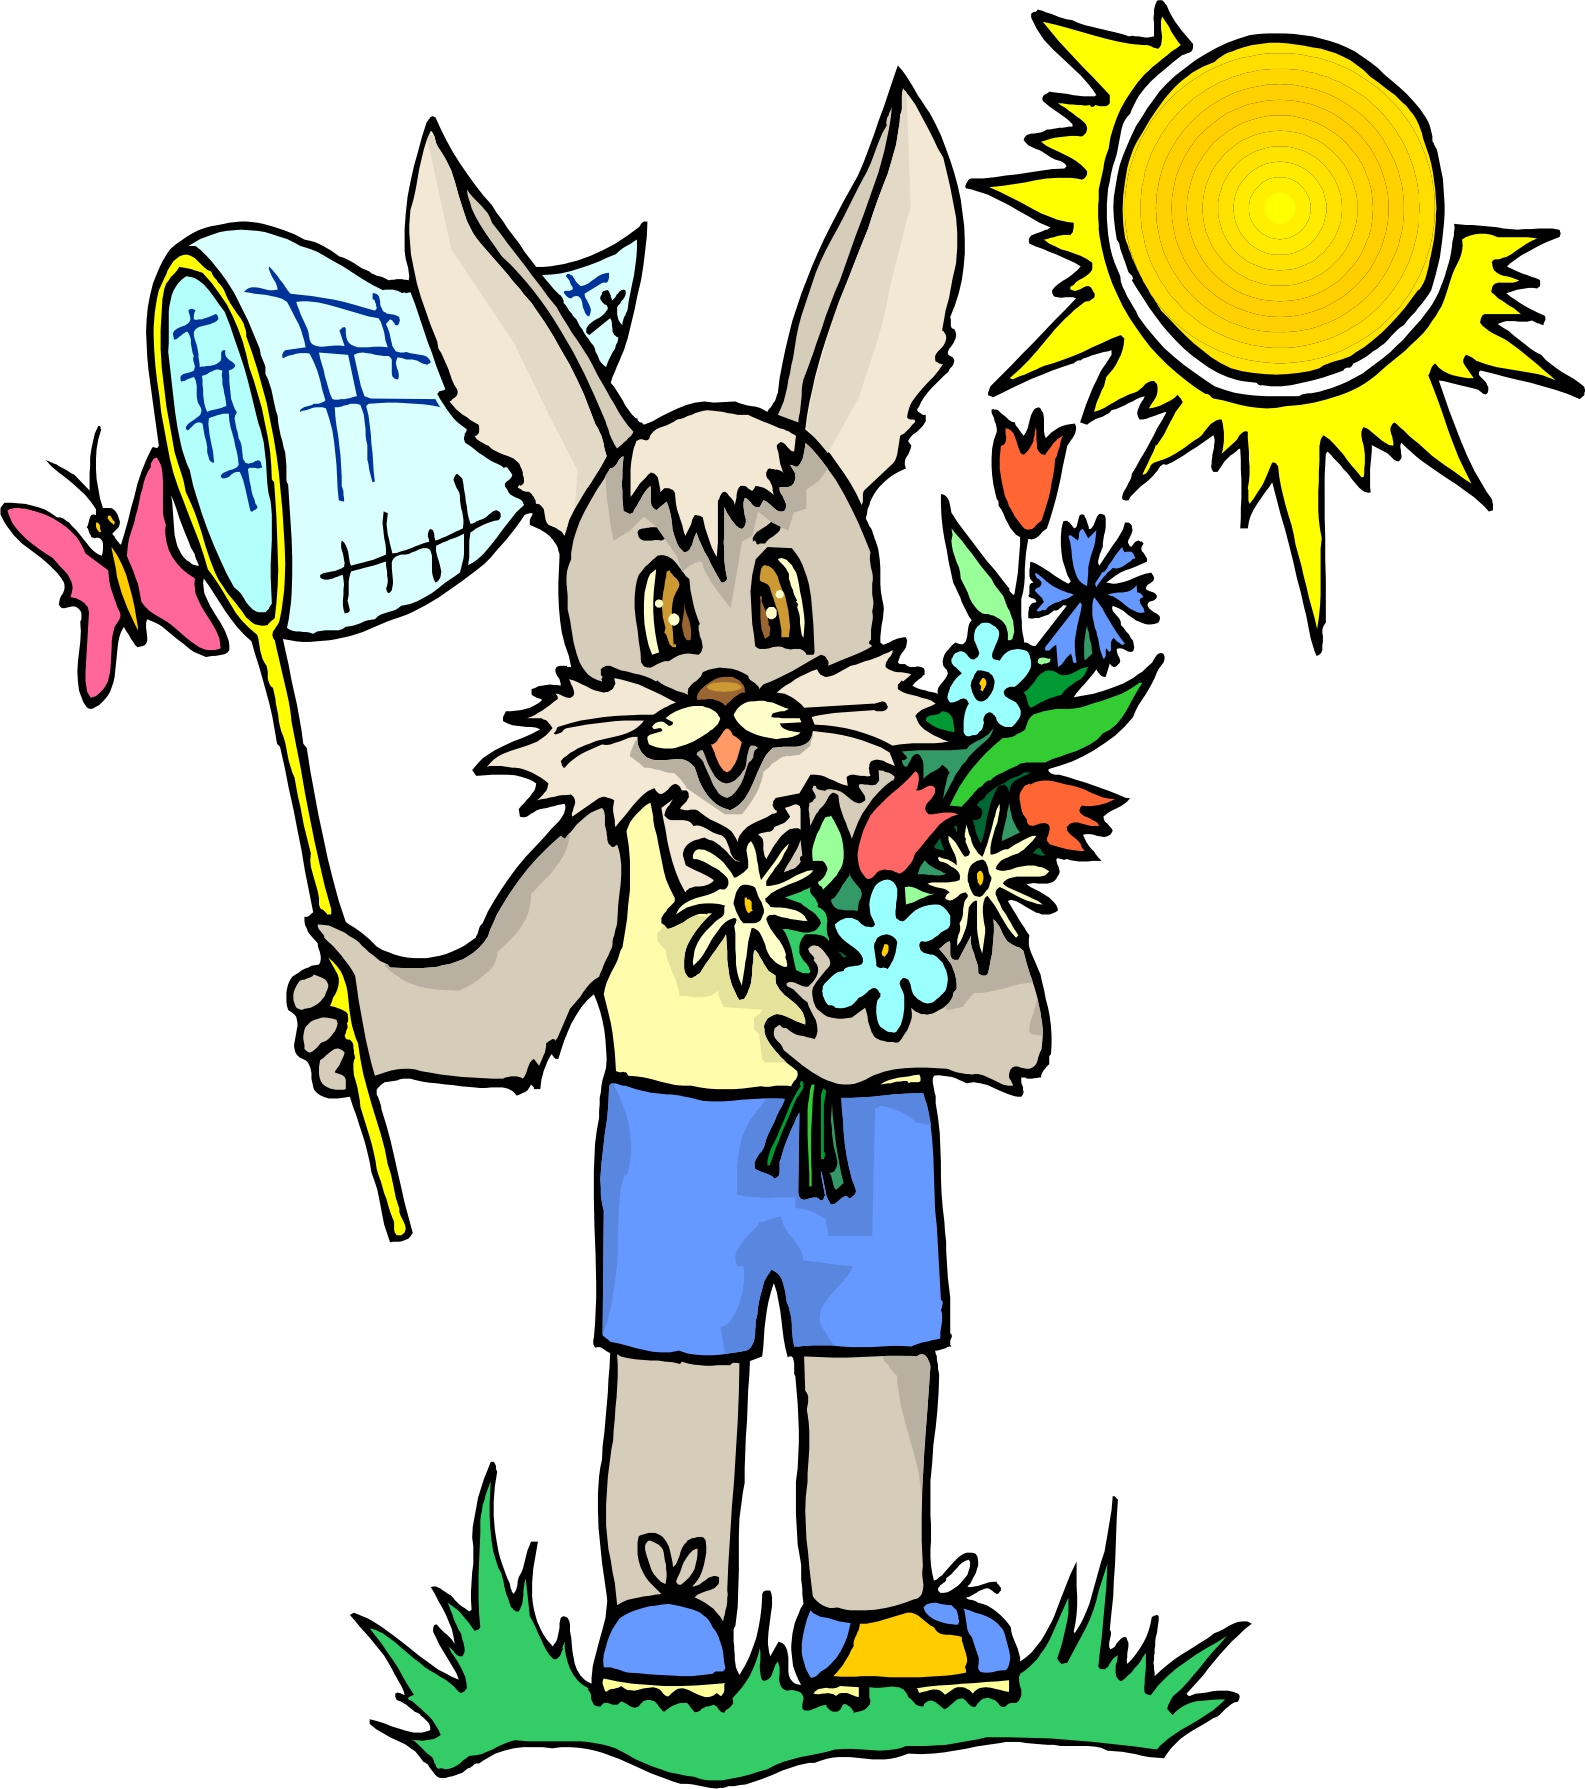 Spring Cartoon Images - ClipArt Best